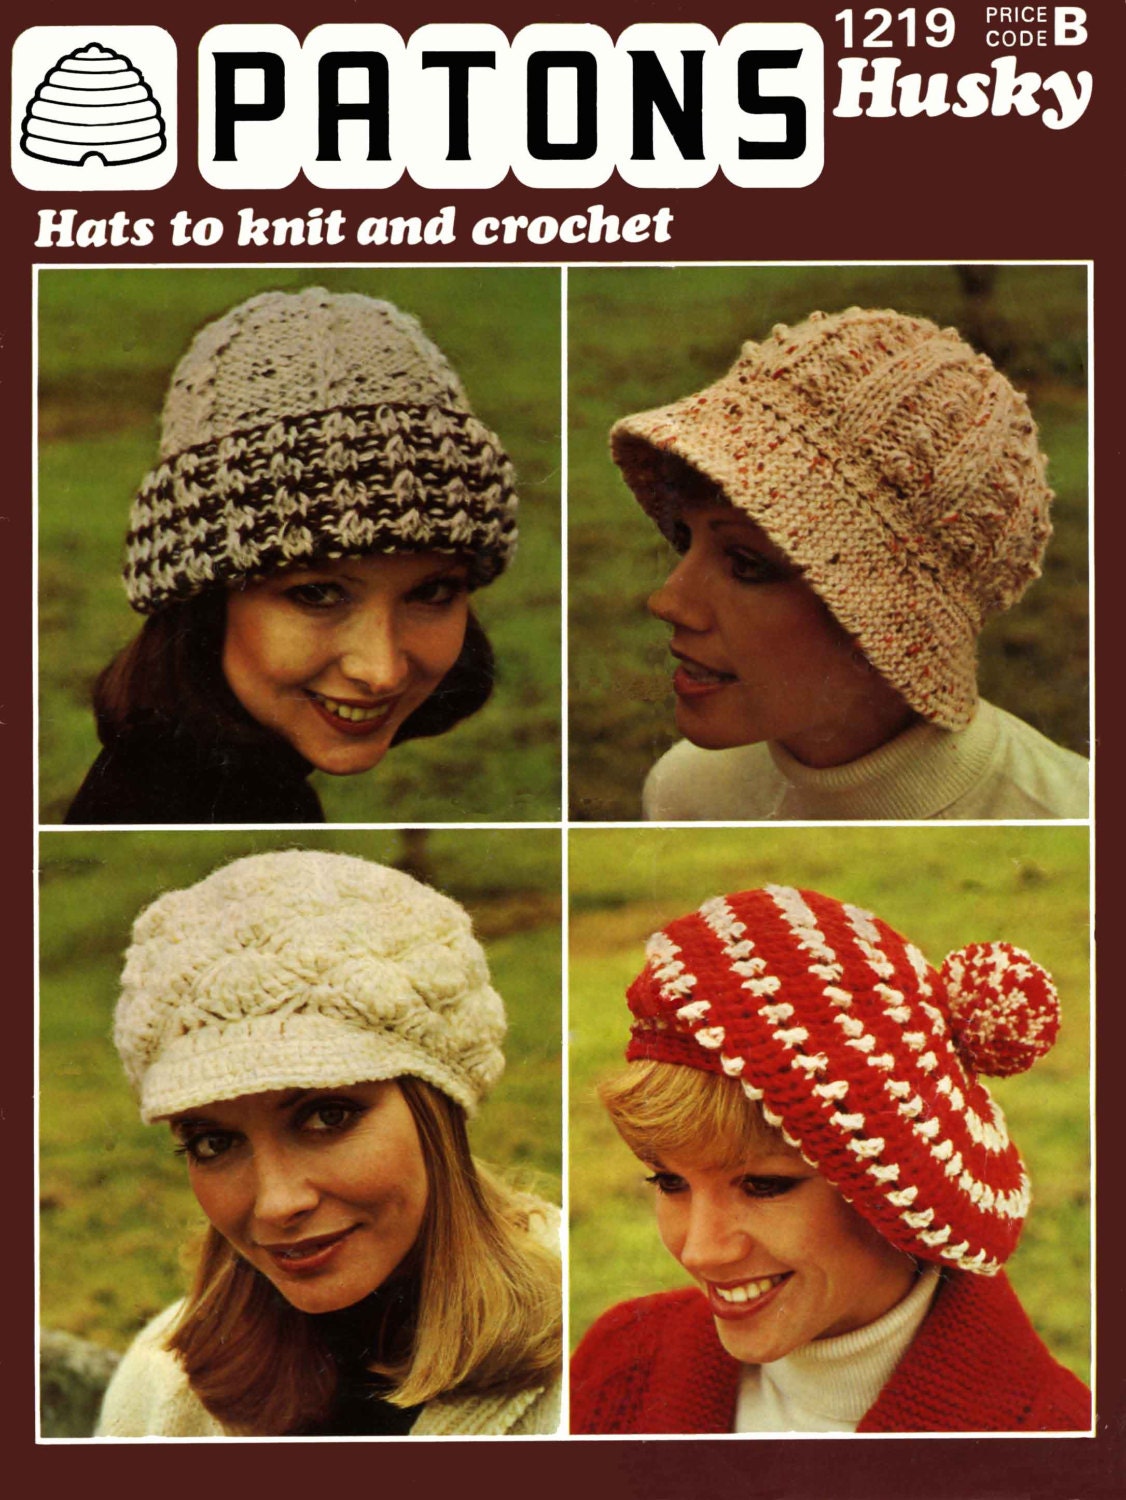 Ladies Hats, 70s Knitting Pattern for Brim, 2 Tone Hat & Crochet Pattern for Peaked Cap, Striped Beret, Chunky, Patons 1219